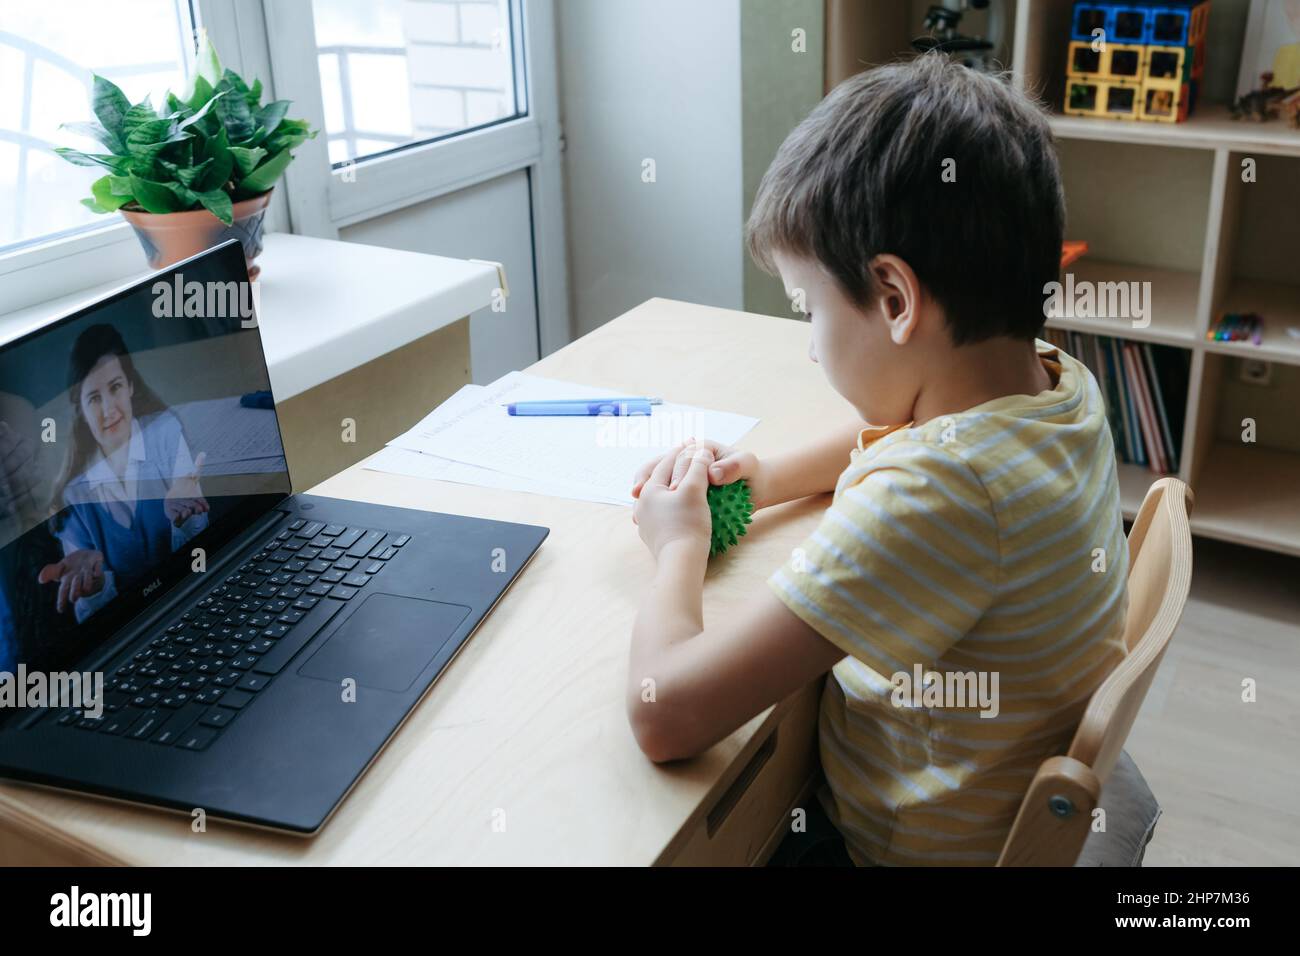 8 years old boy sit by desk with laptop and do exercise with massage ball Stock Photo